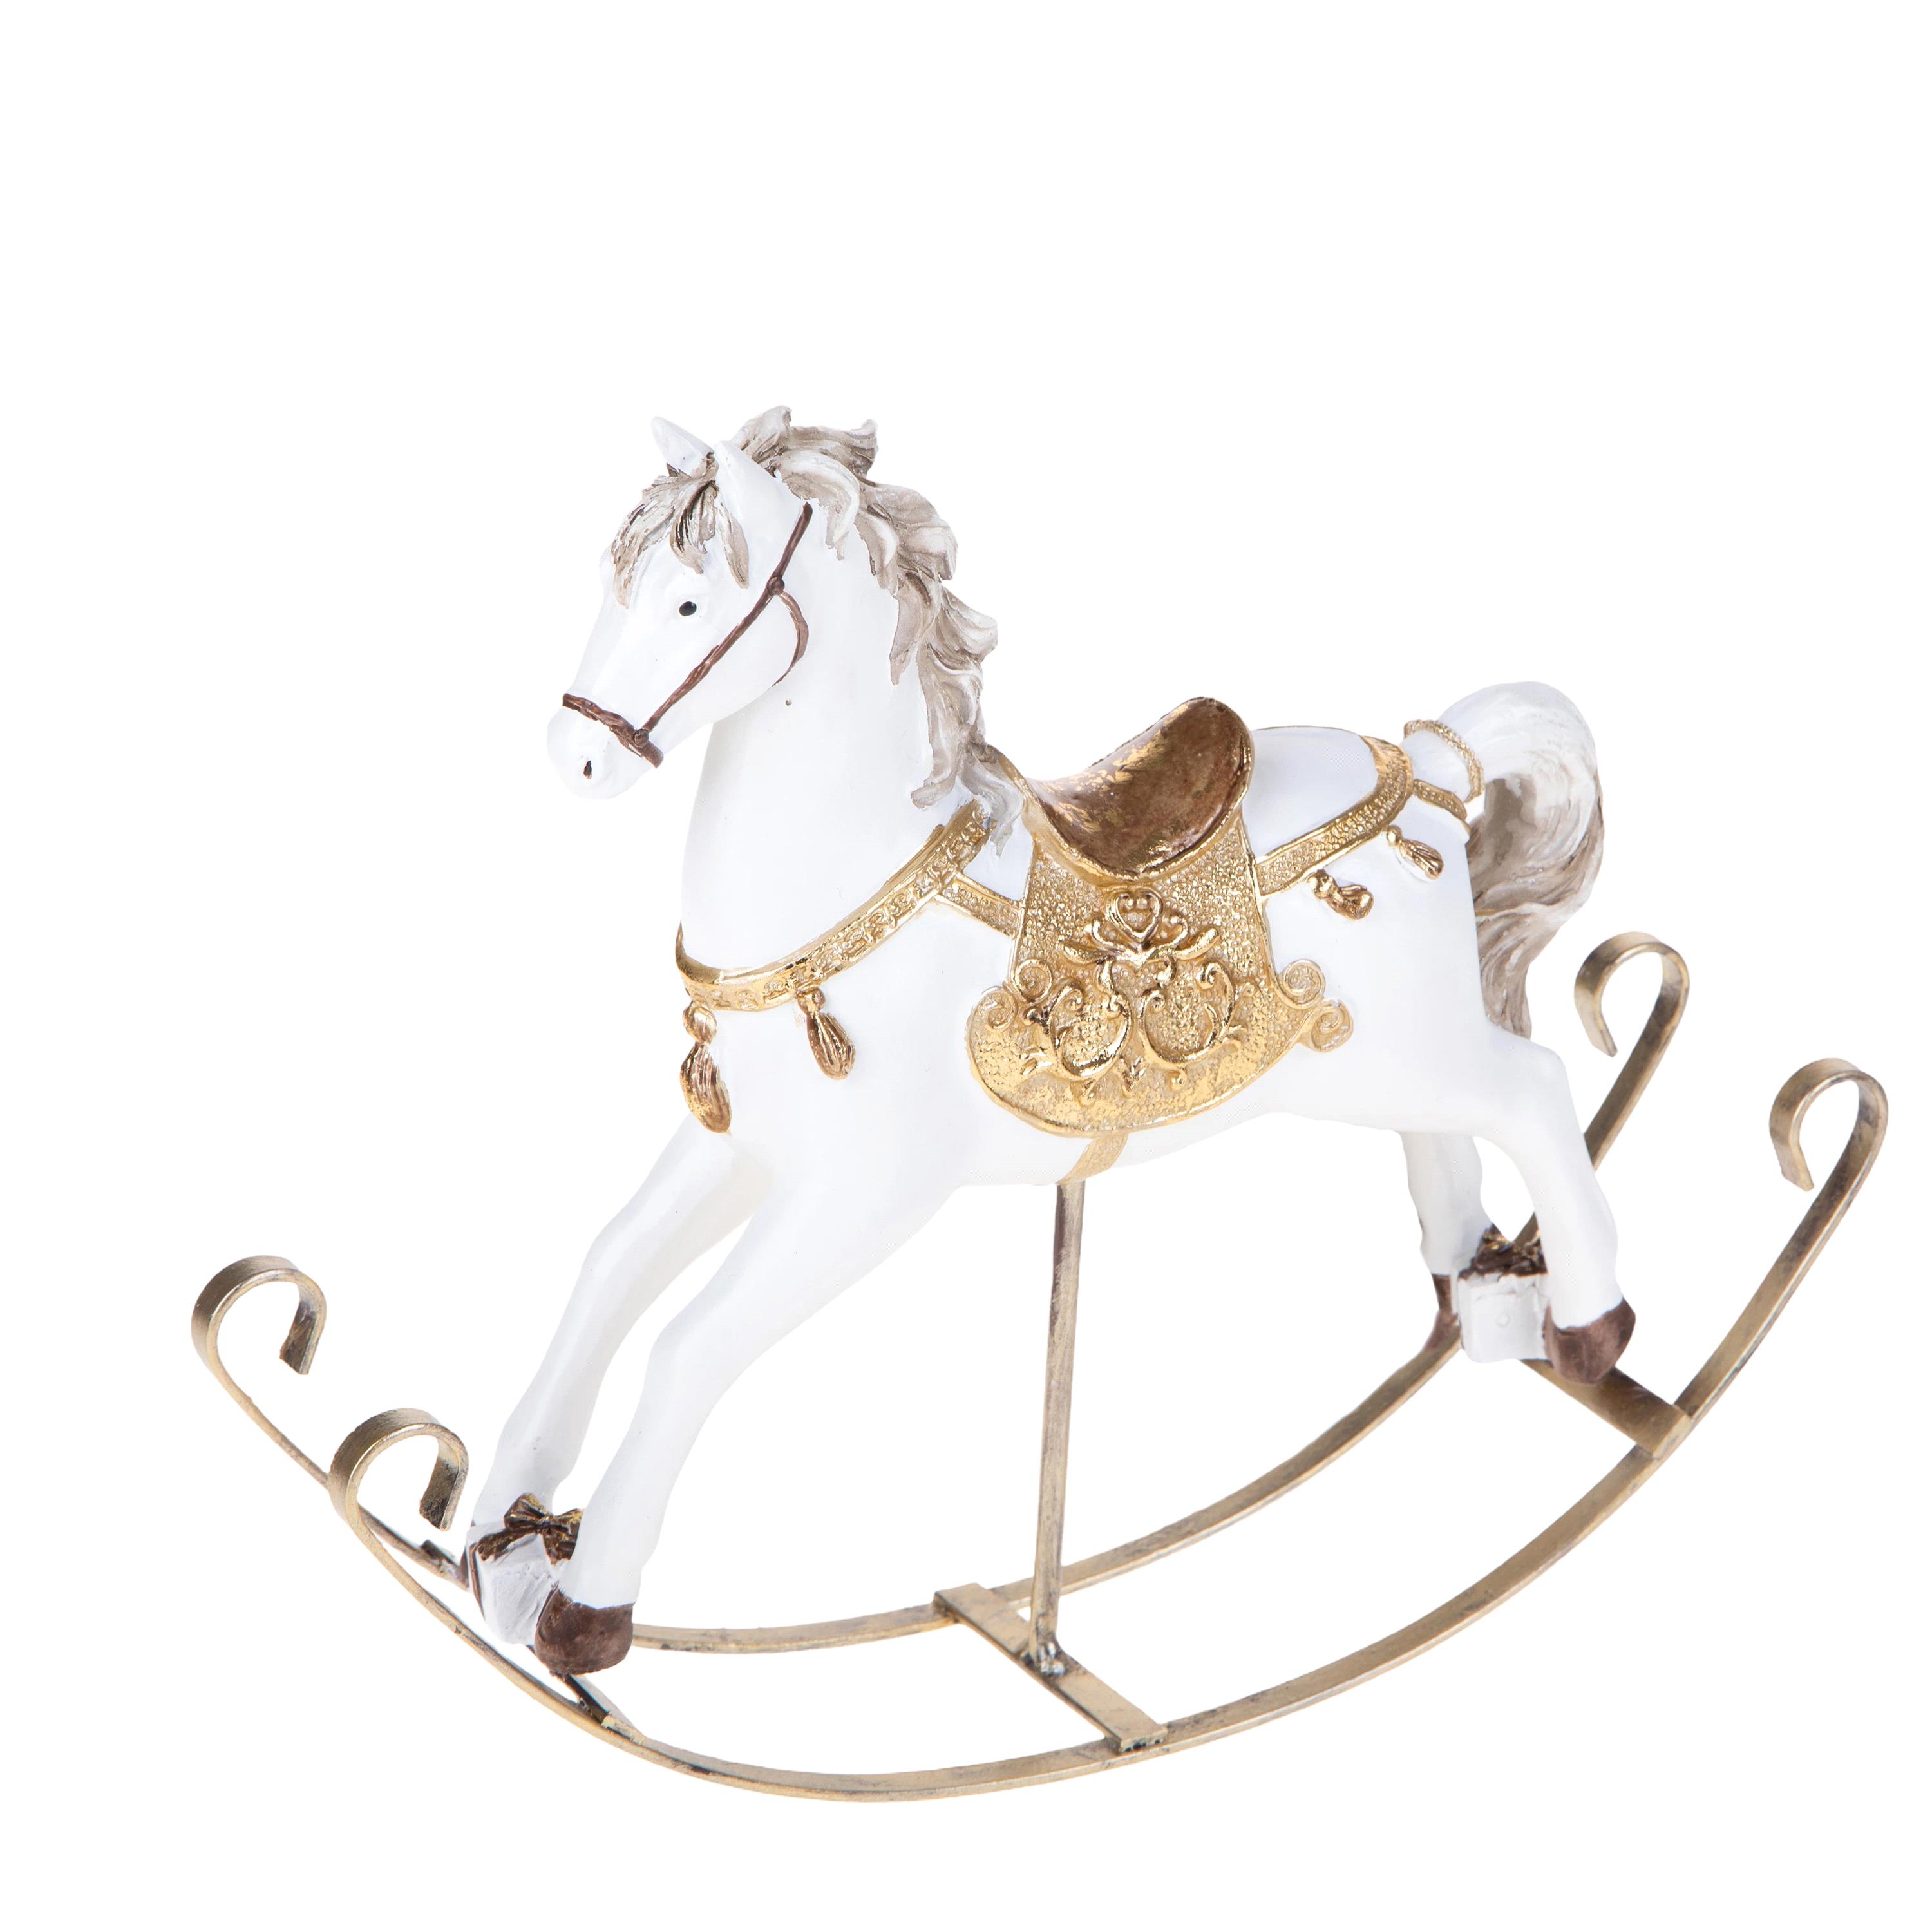 Weihnachtsartikel,FIRS CHRISTMAS TABLE,CAVALLO A DONDOLO 25XH.23 CM